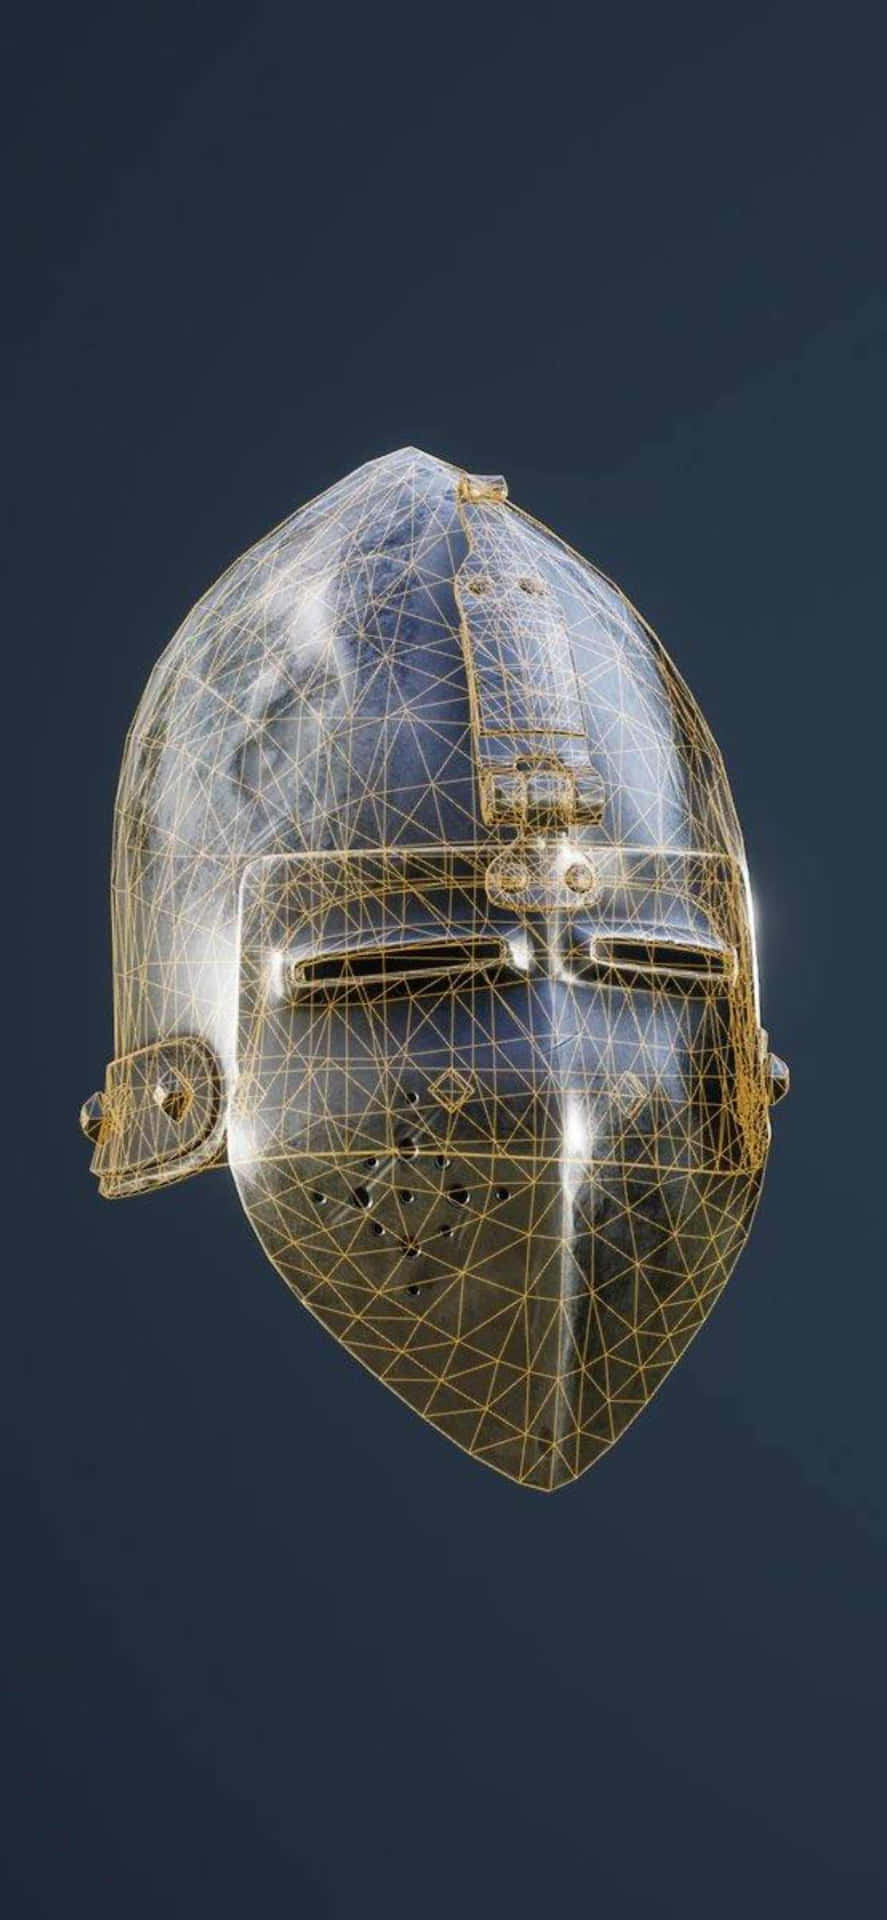 A Gold Helmet With A Wire Mesh On It